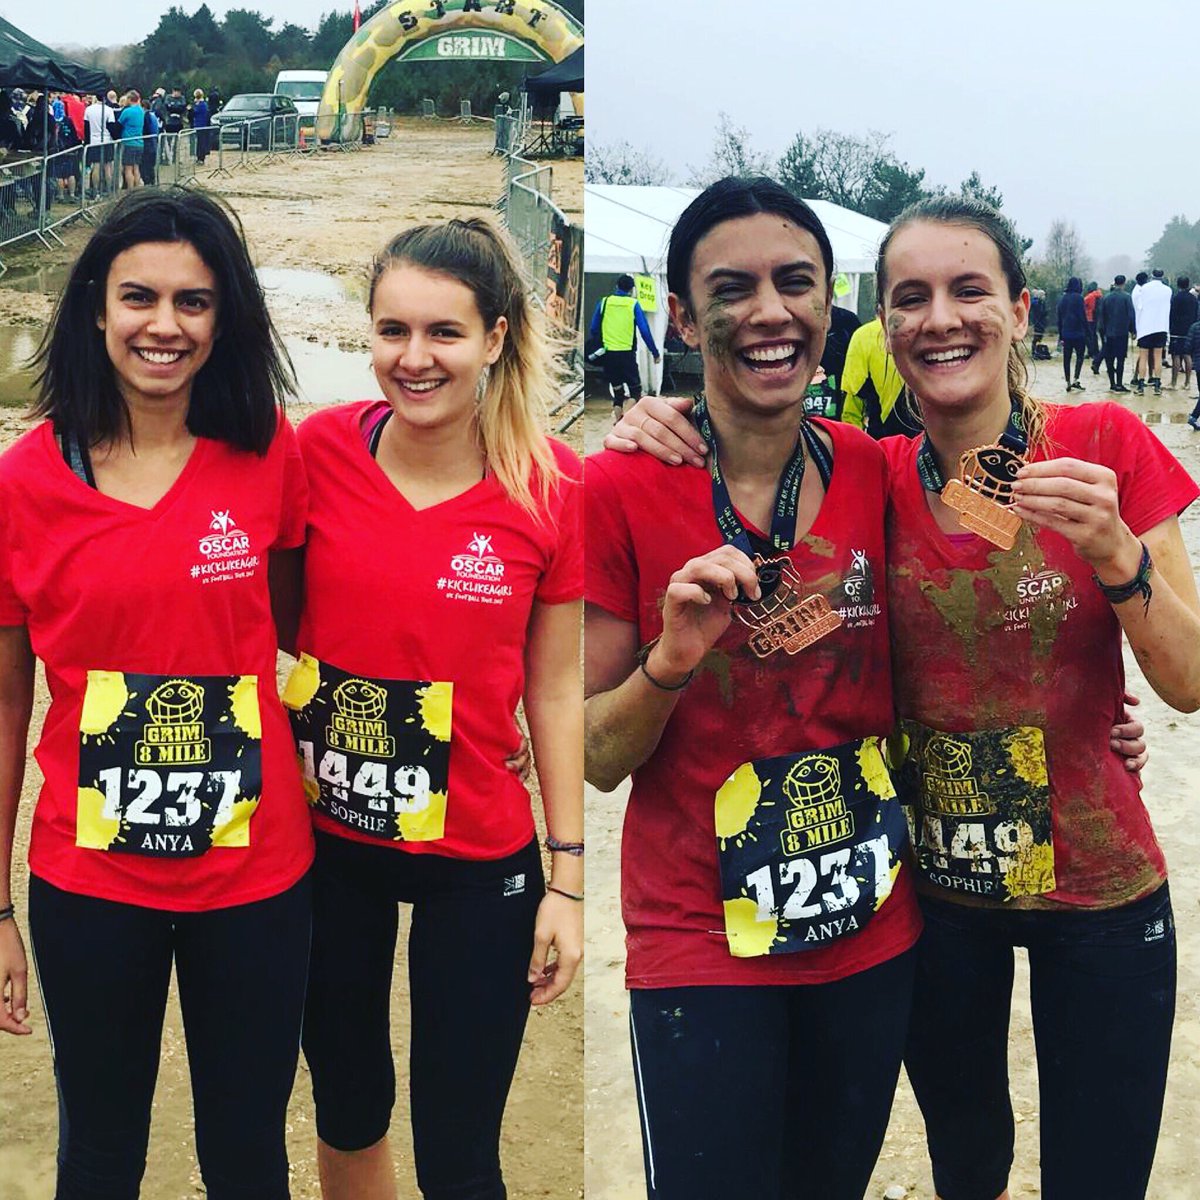 @OSCAR_fdn volunteers are #toughmudders. These two crazy girls completed the @GRIMChallenge to raise money for underprivileged girls and boys. They need your help to hit their fundraising target mydonate.bt.com/fundraisers/an… #charity #educationwithakick